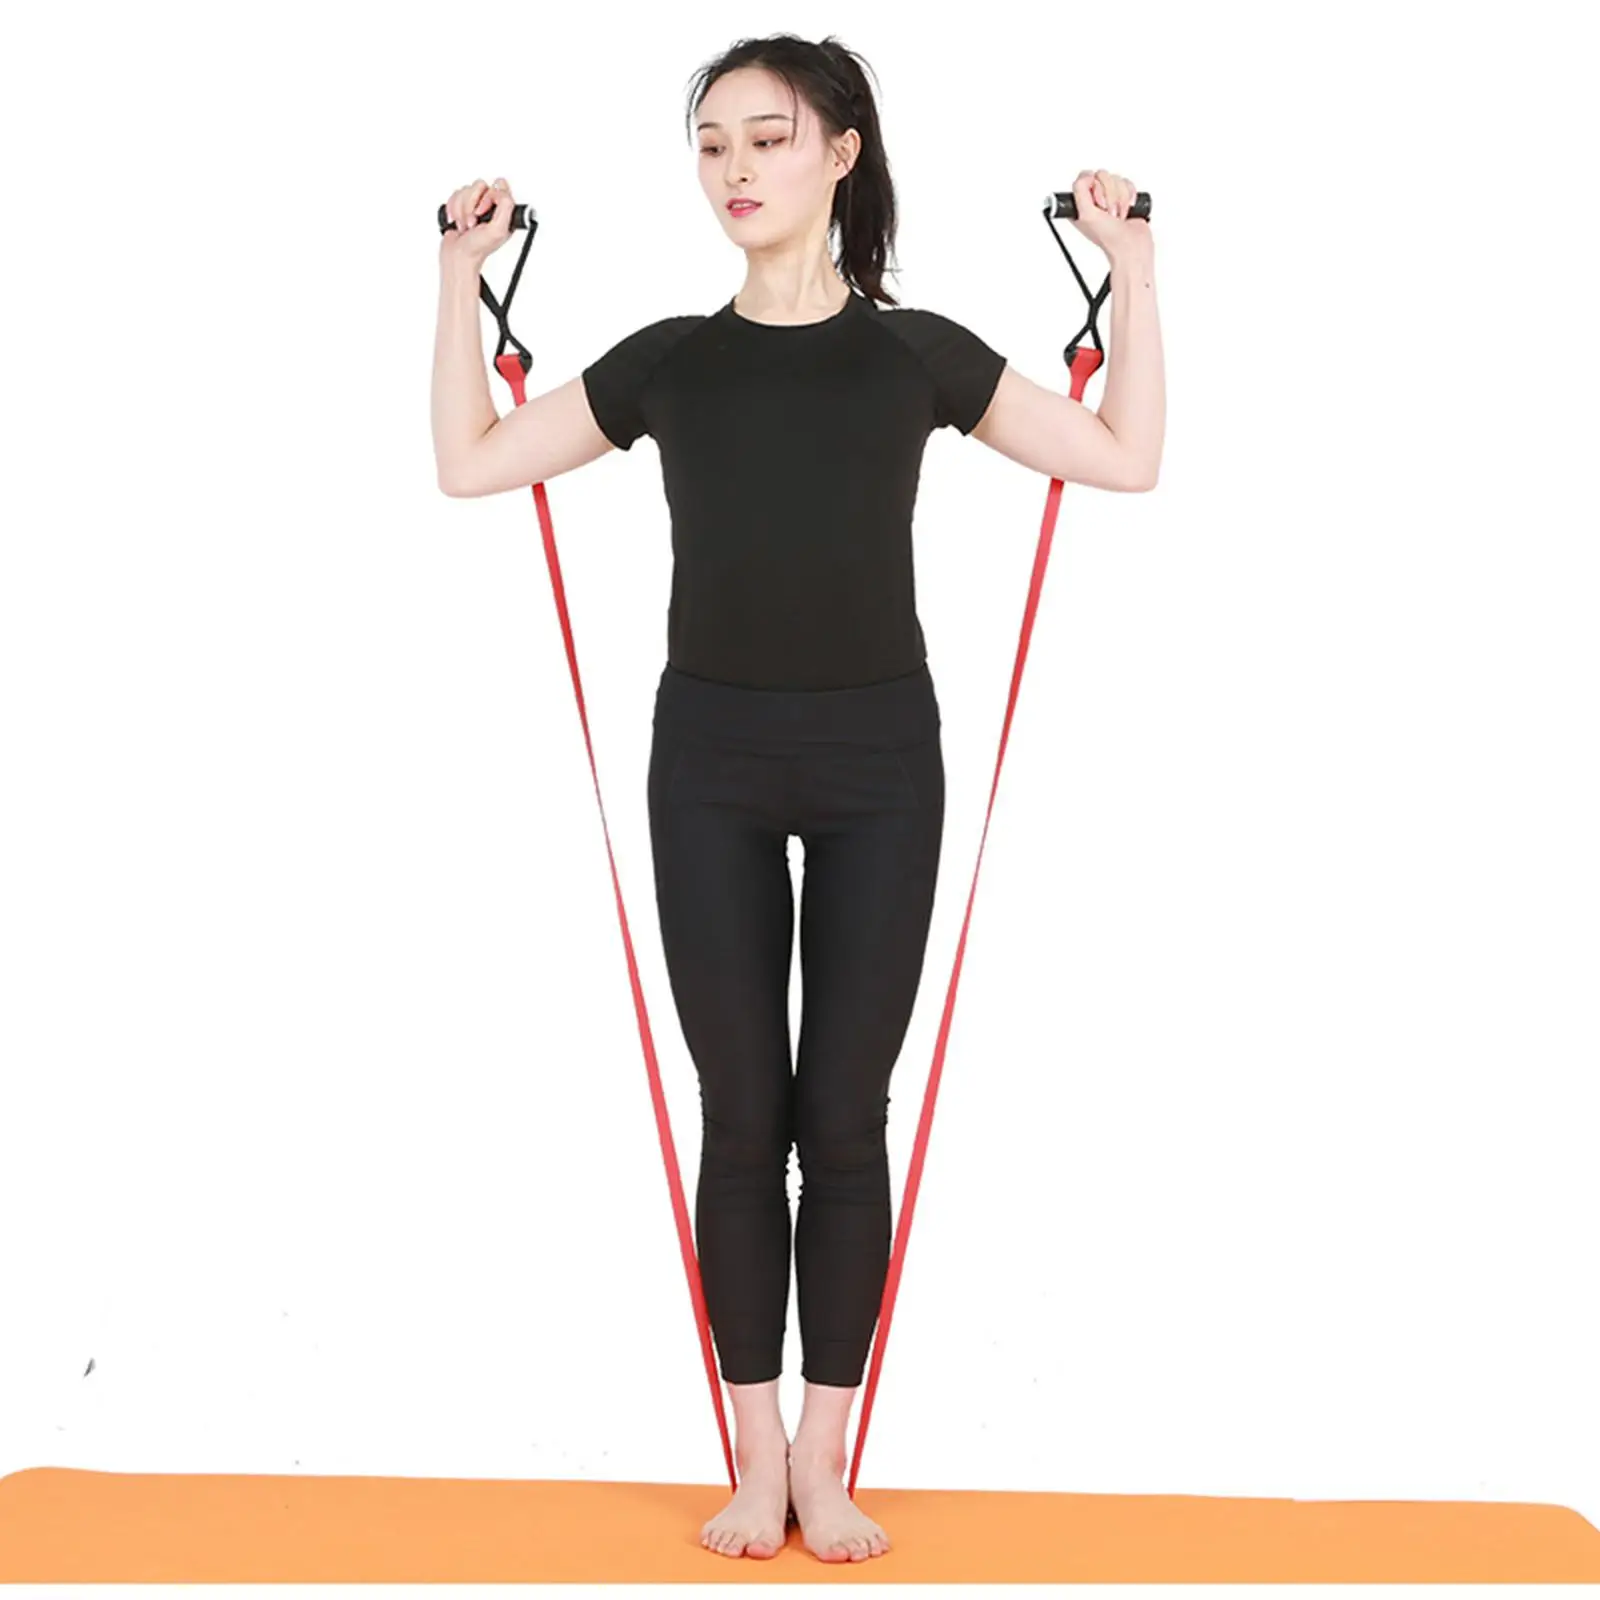 Exercise Resistance Bands Handle Fitness Equipment Home Expander Gym Workout